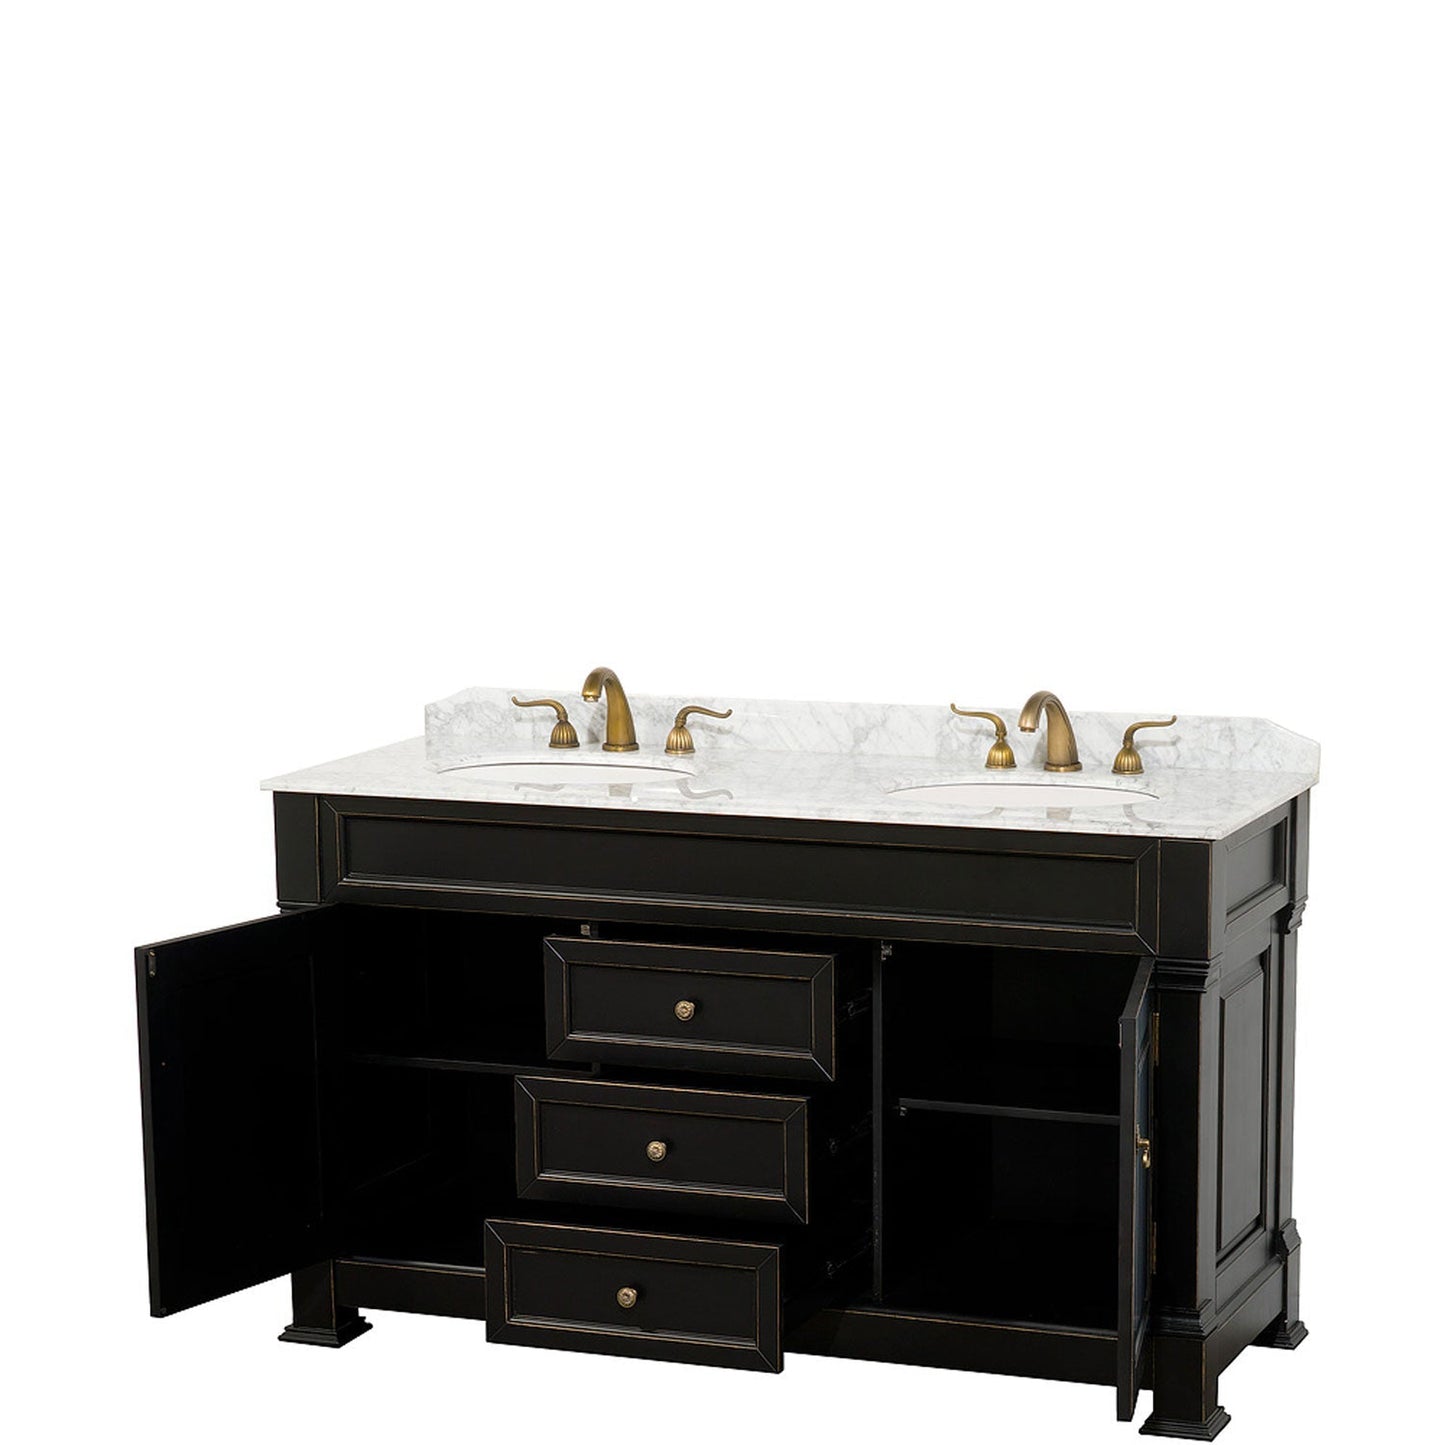 Wyndham Collection Andover 60" Double Bathroom Vanity in Black With White Carrara Marble Countertop & Undermount Oval Sink